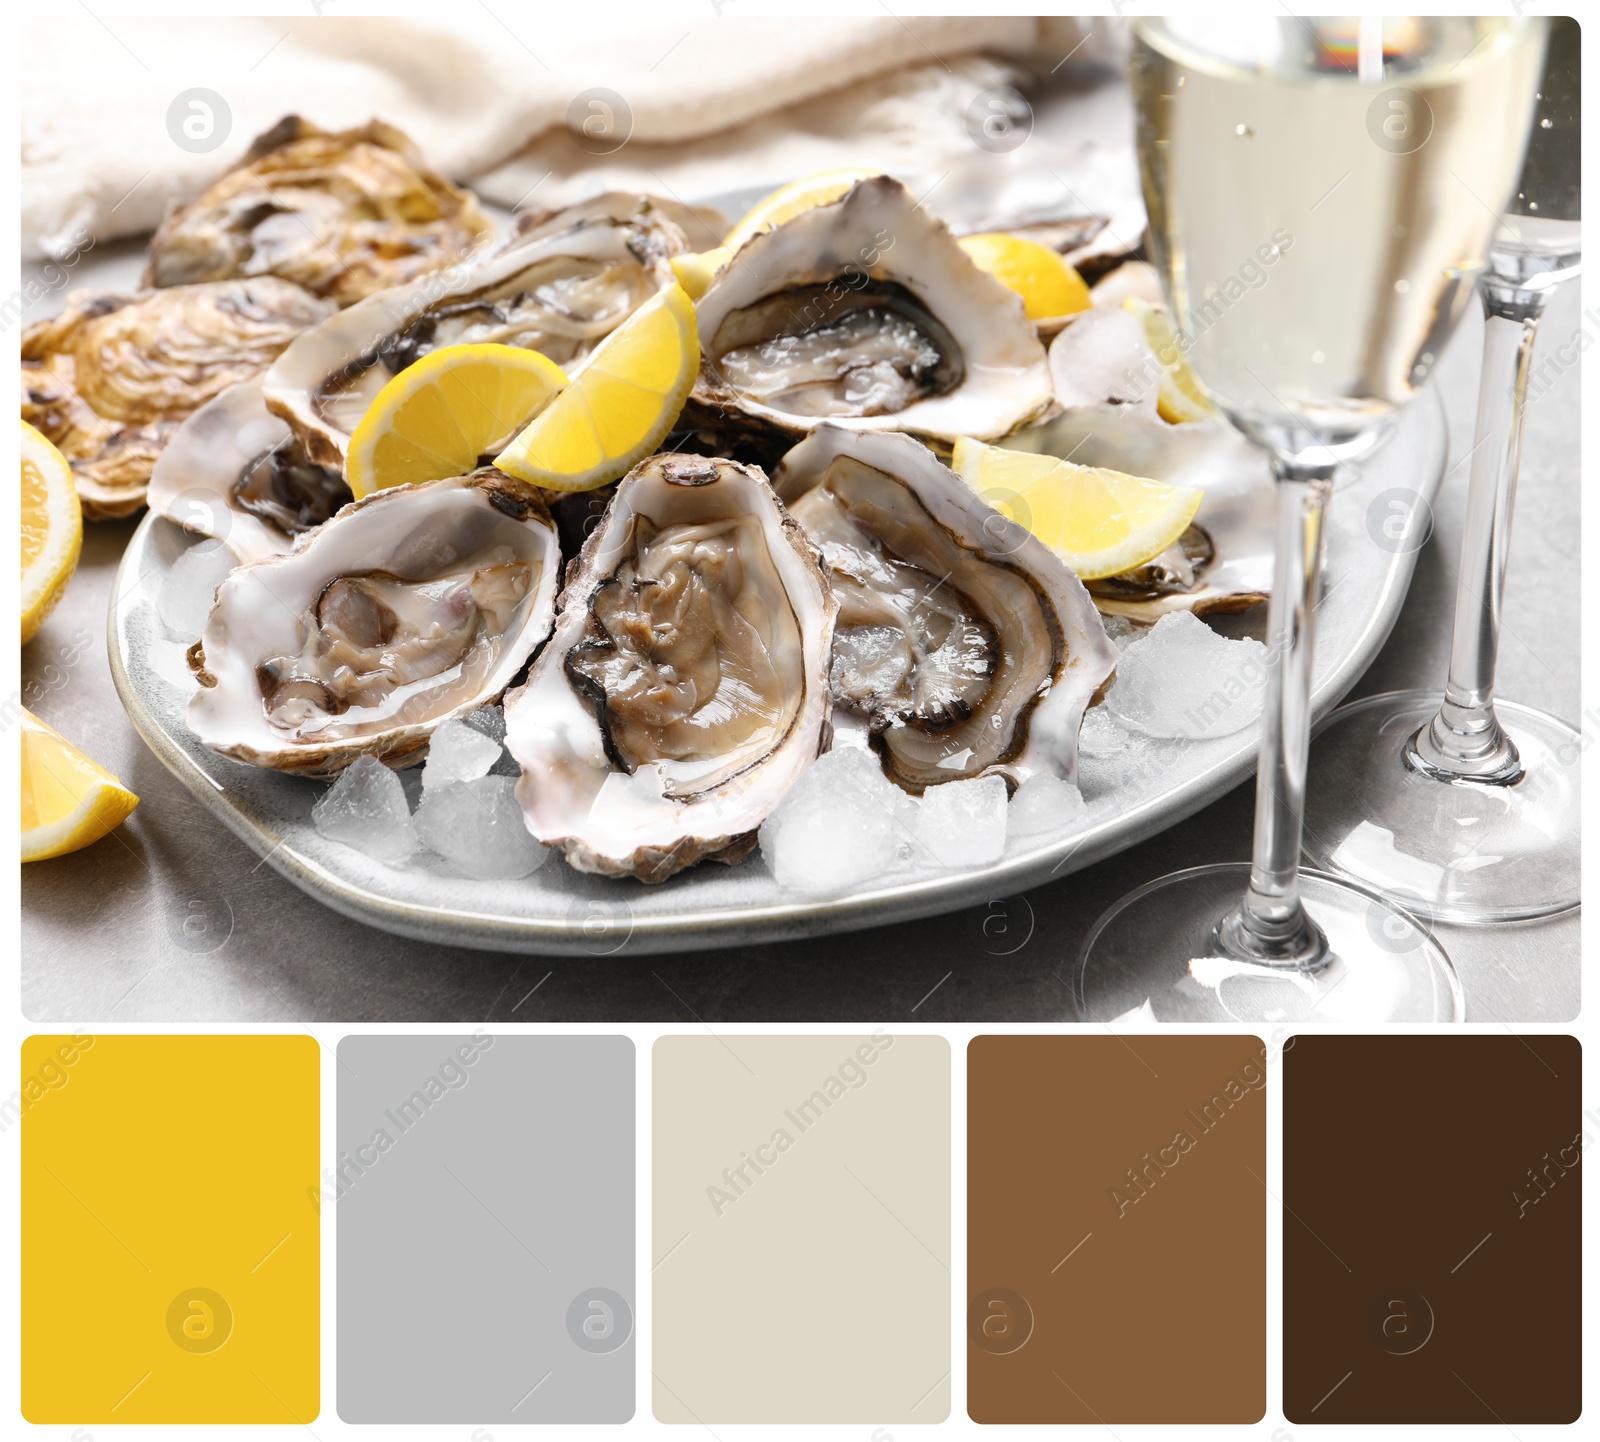 Image of Fresh oysters with lemon and glasses of champagne on table and color palette. Collage